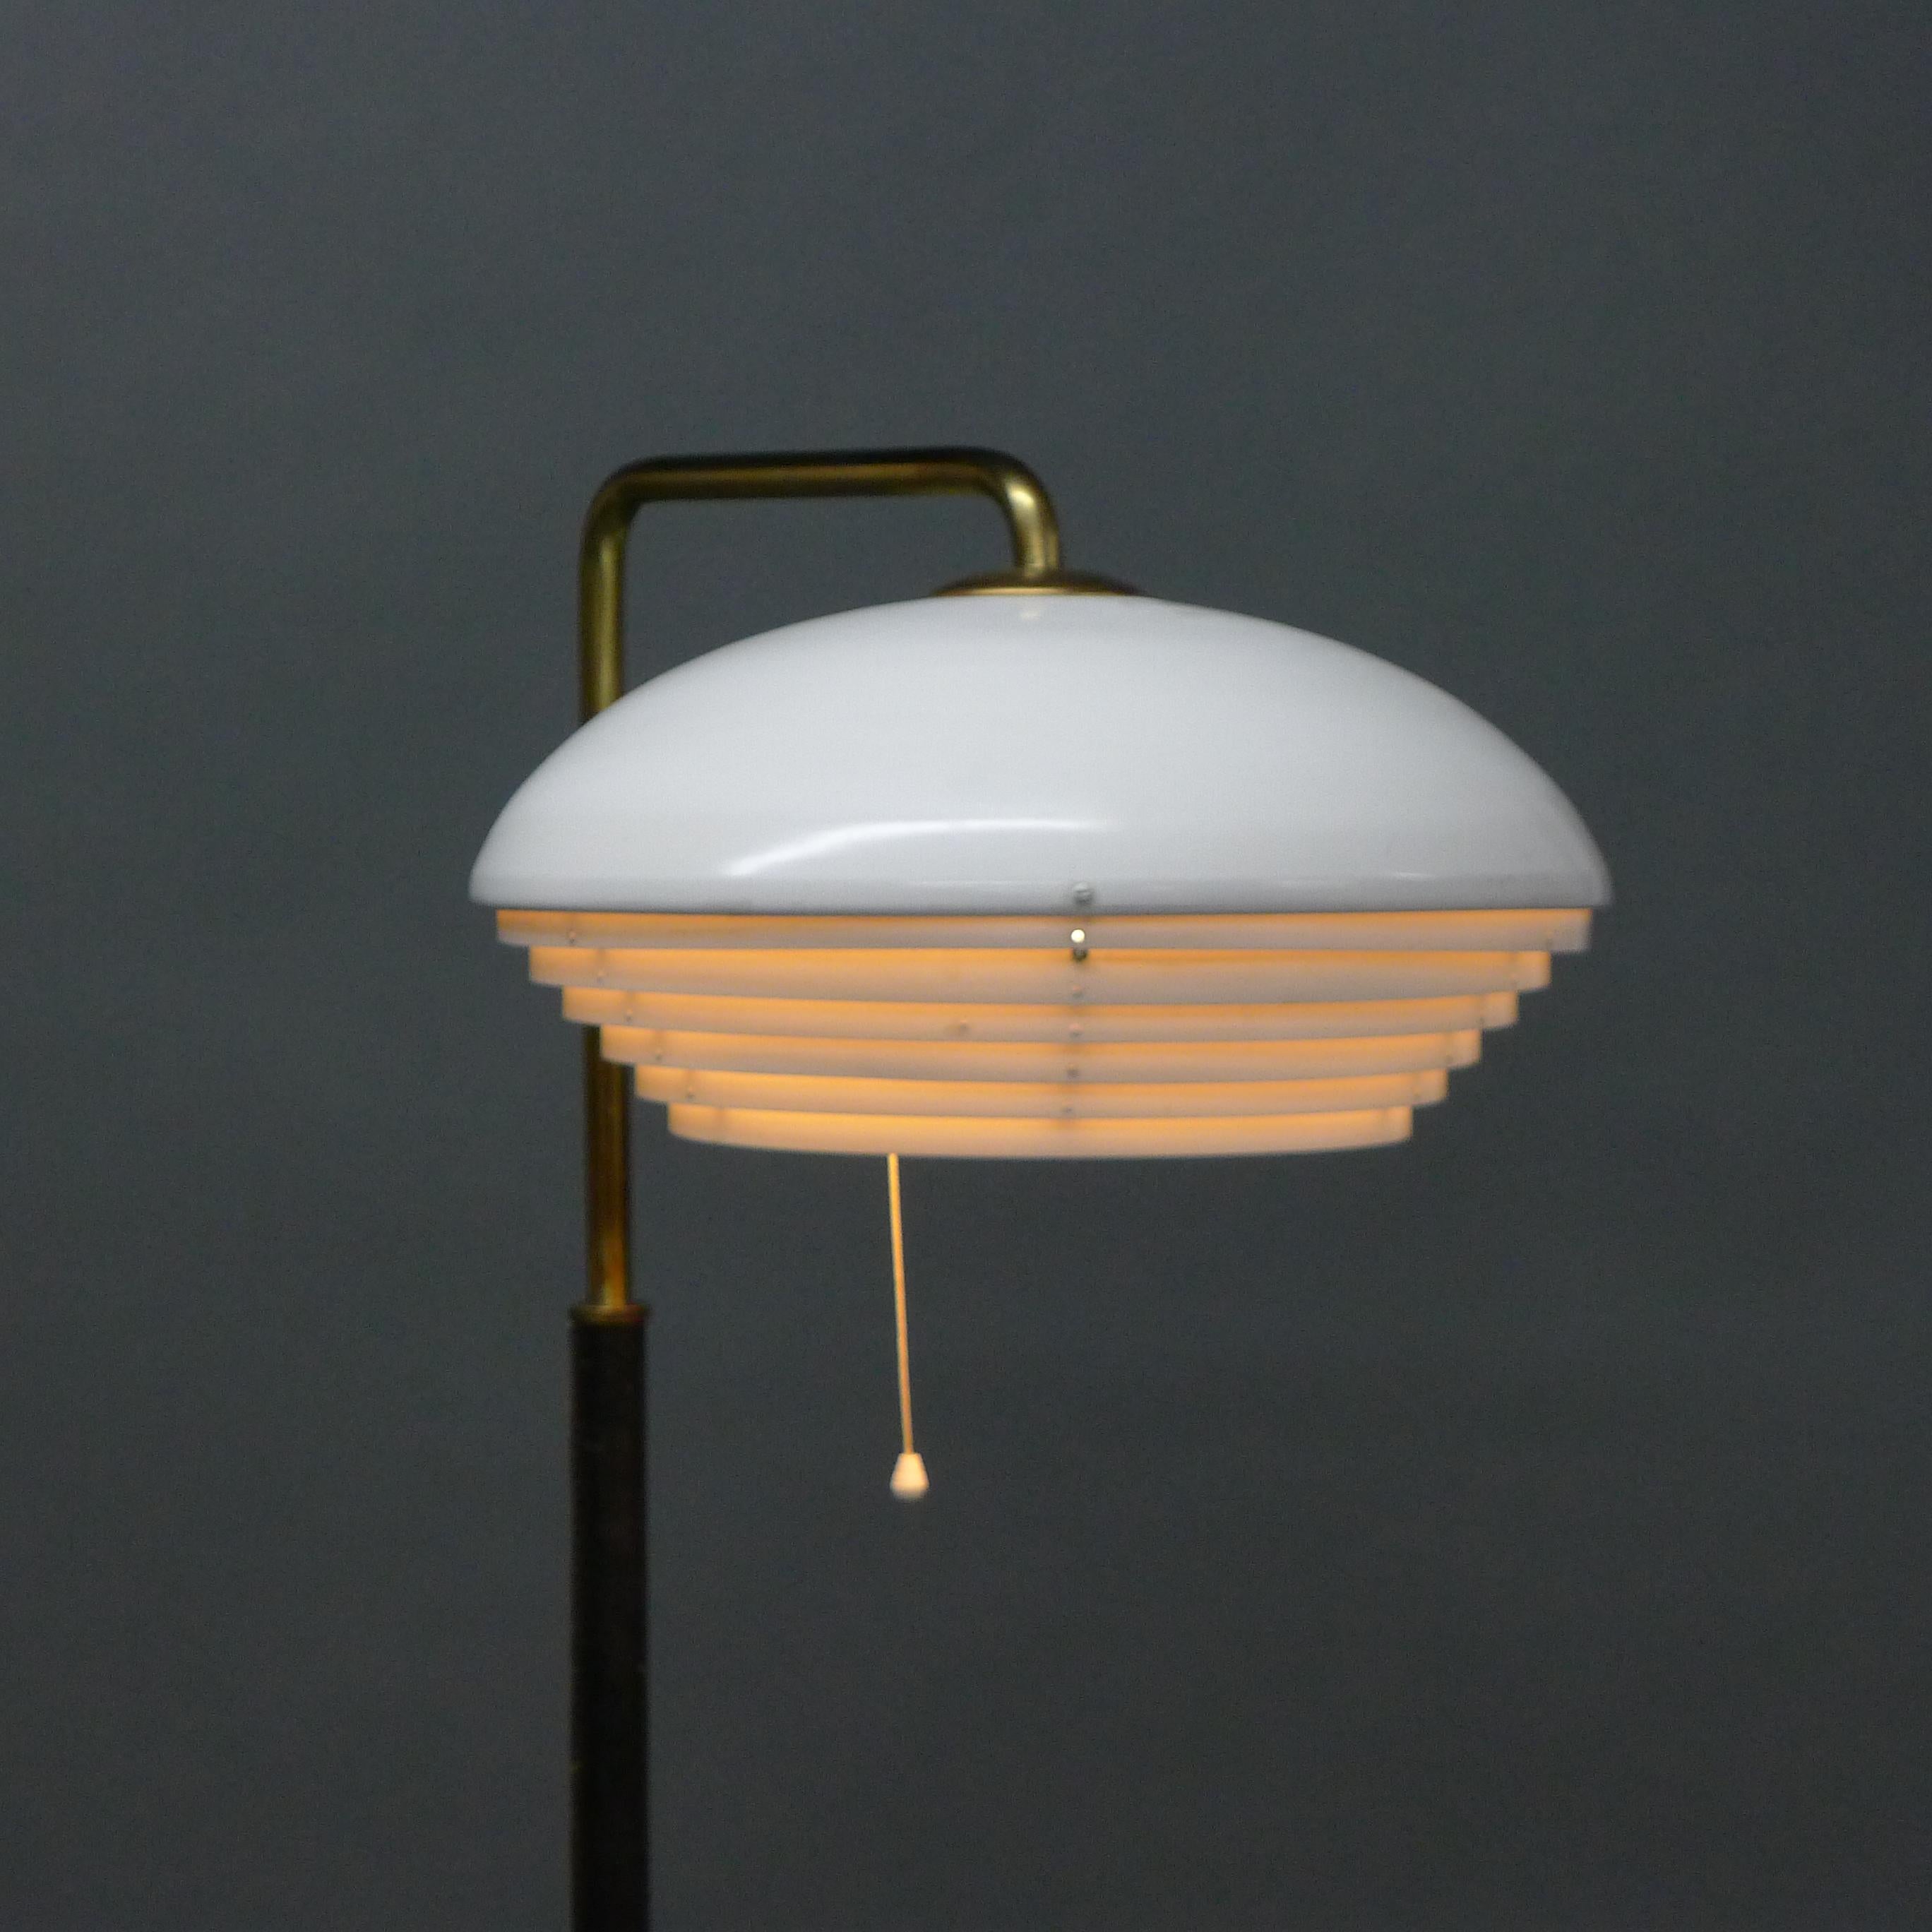 Alvar Aalto model A811 floor lamp, produced by Valaistustyö, Finland 1950s.

This original floor lamp has a white painted metal louvred shade on a brass neck extending into a leather covered pole and base.  It has a pull cord to extending from the